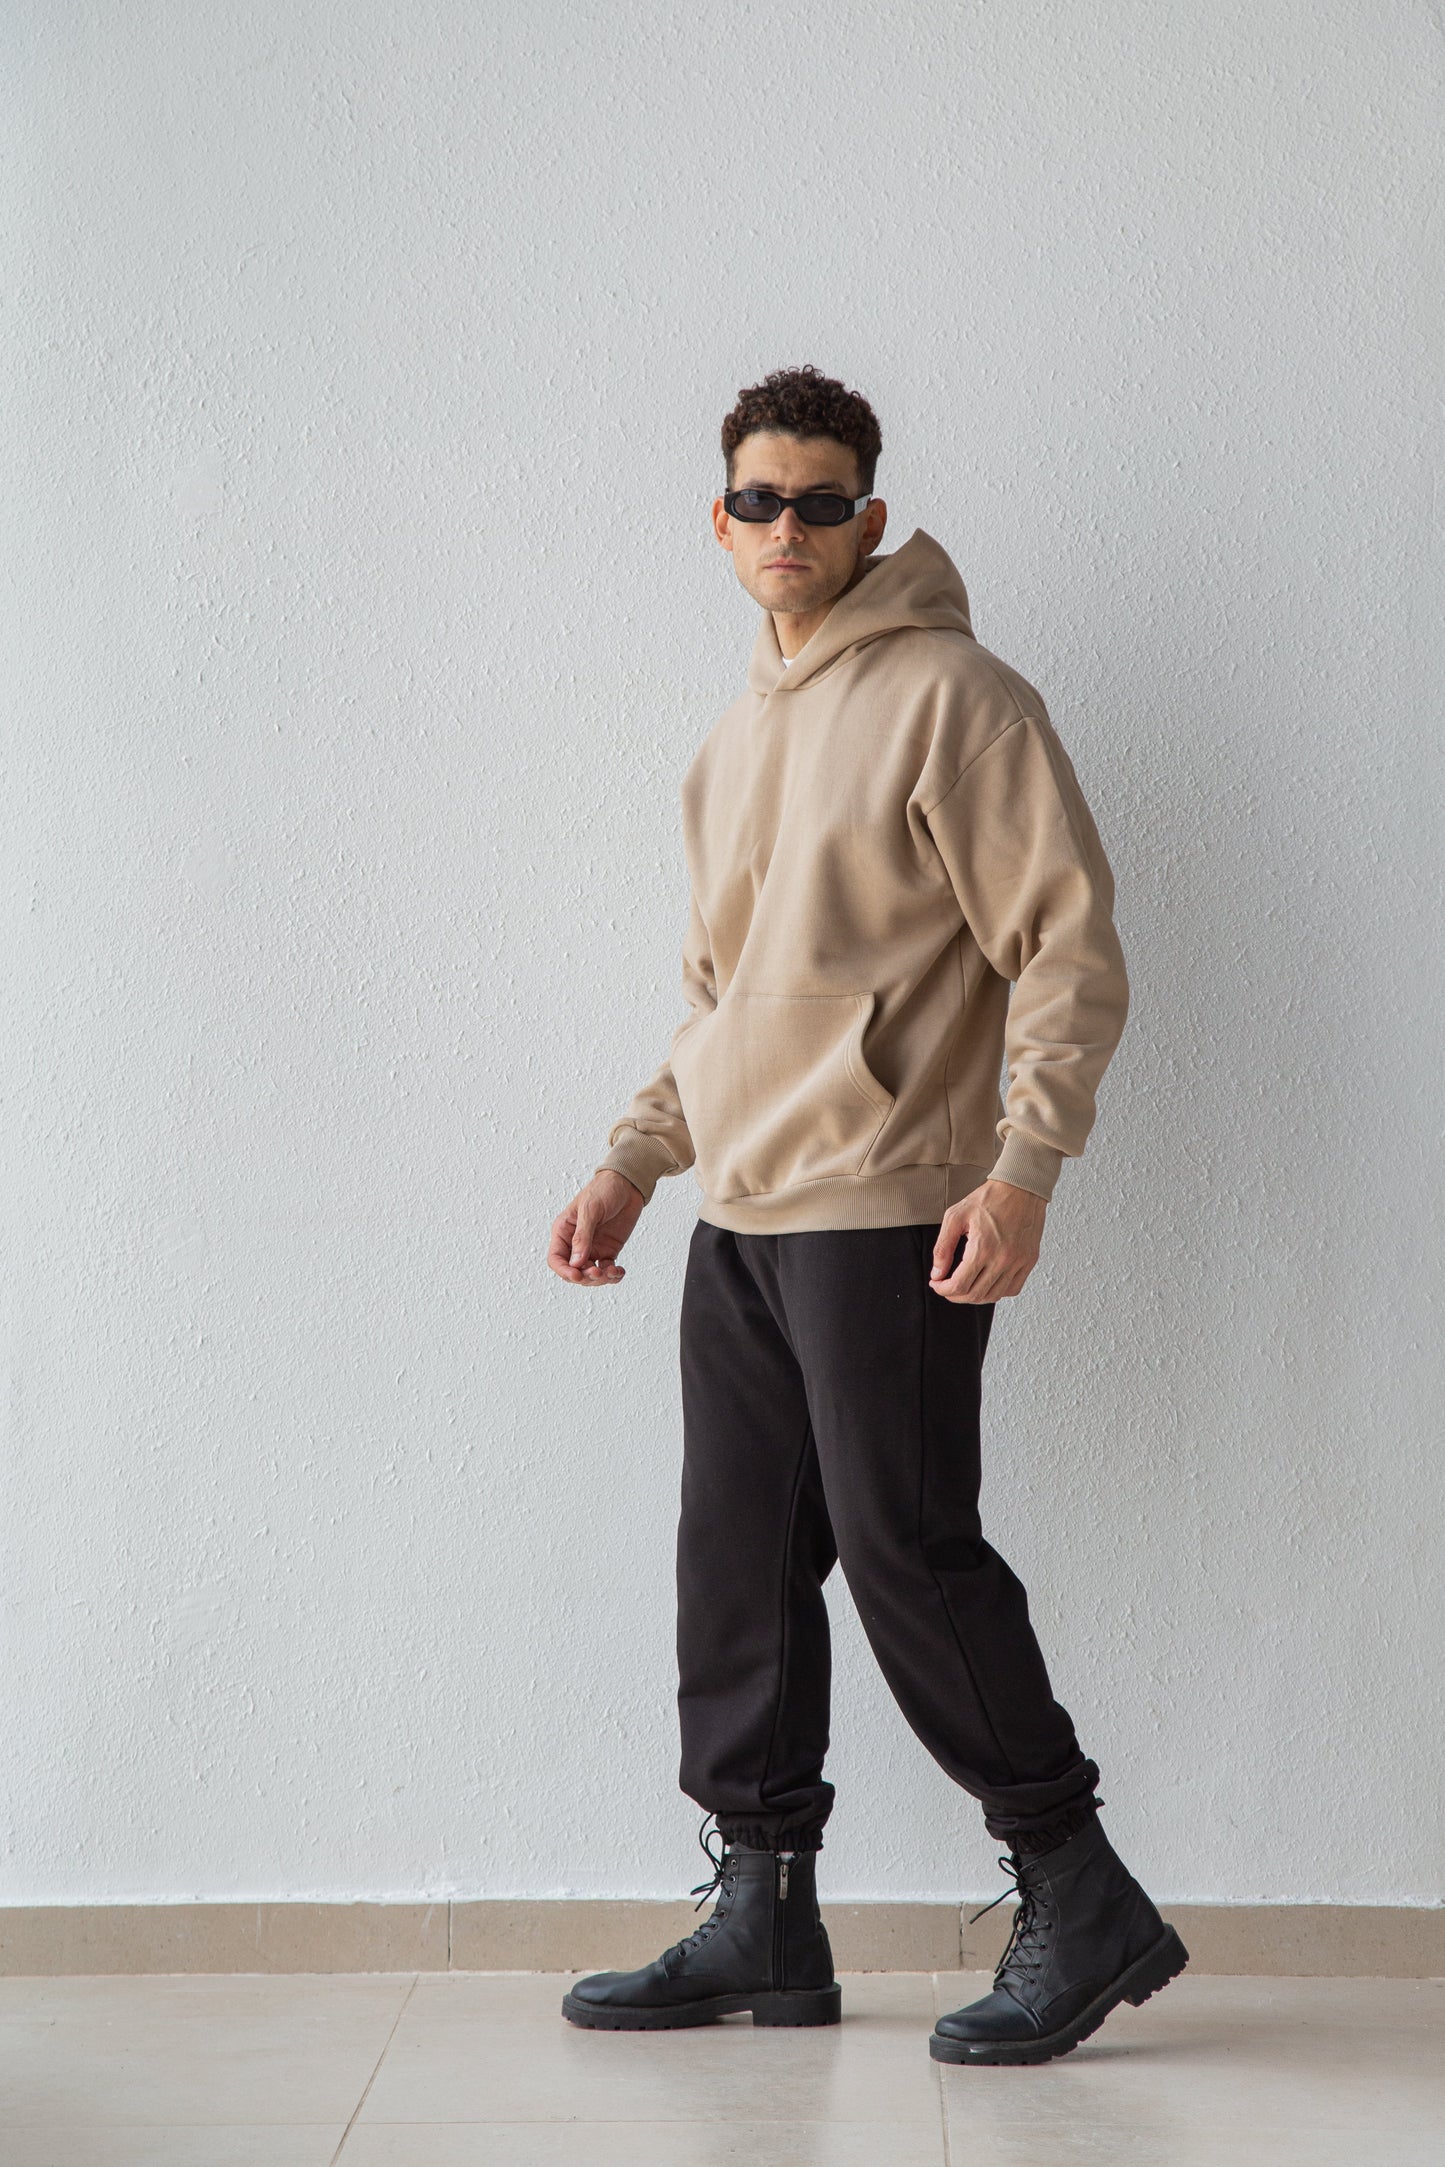 Oversized hoodie - Automatic wholesale prices at checkout